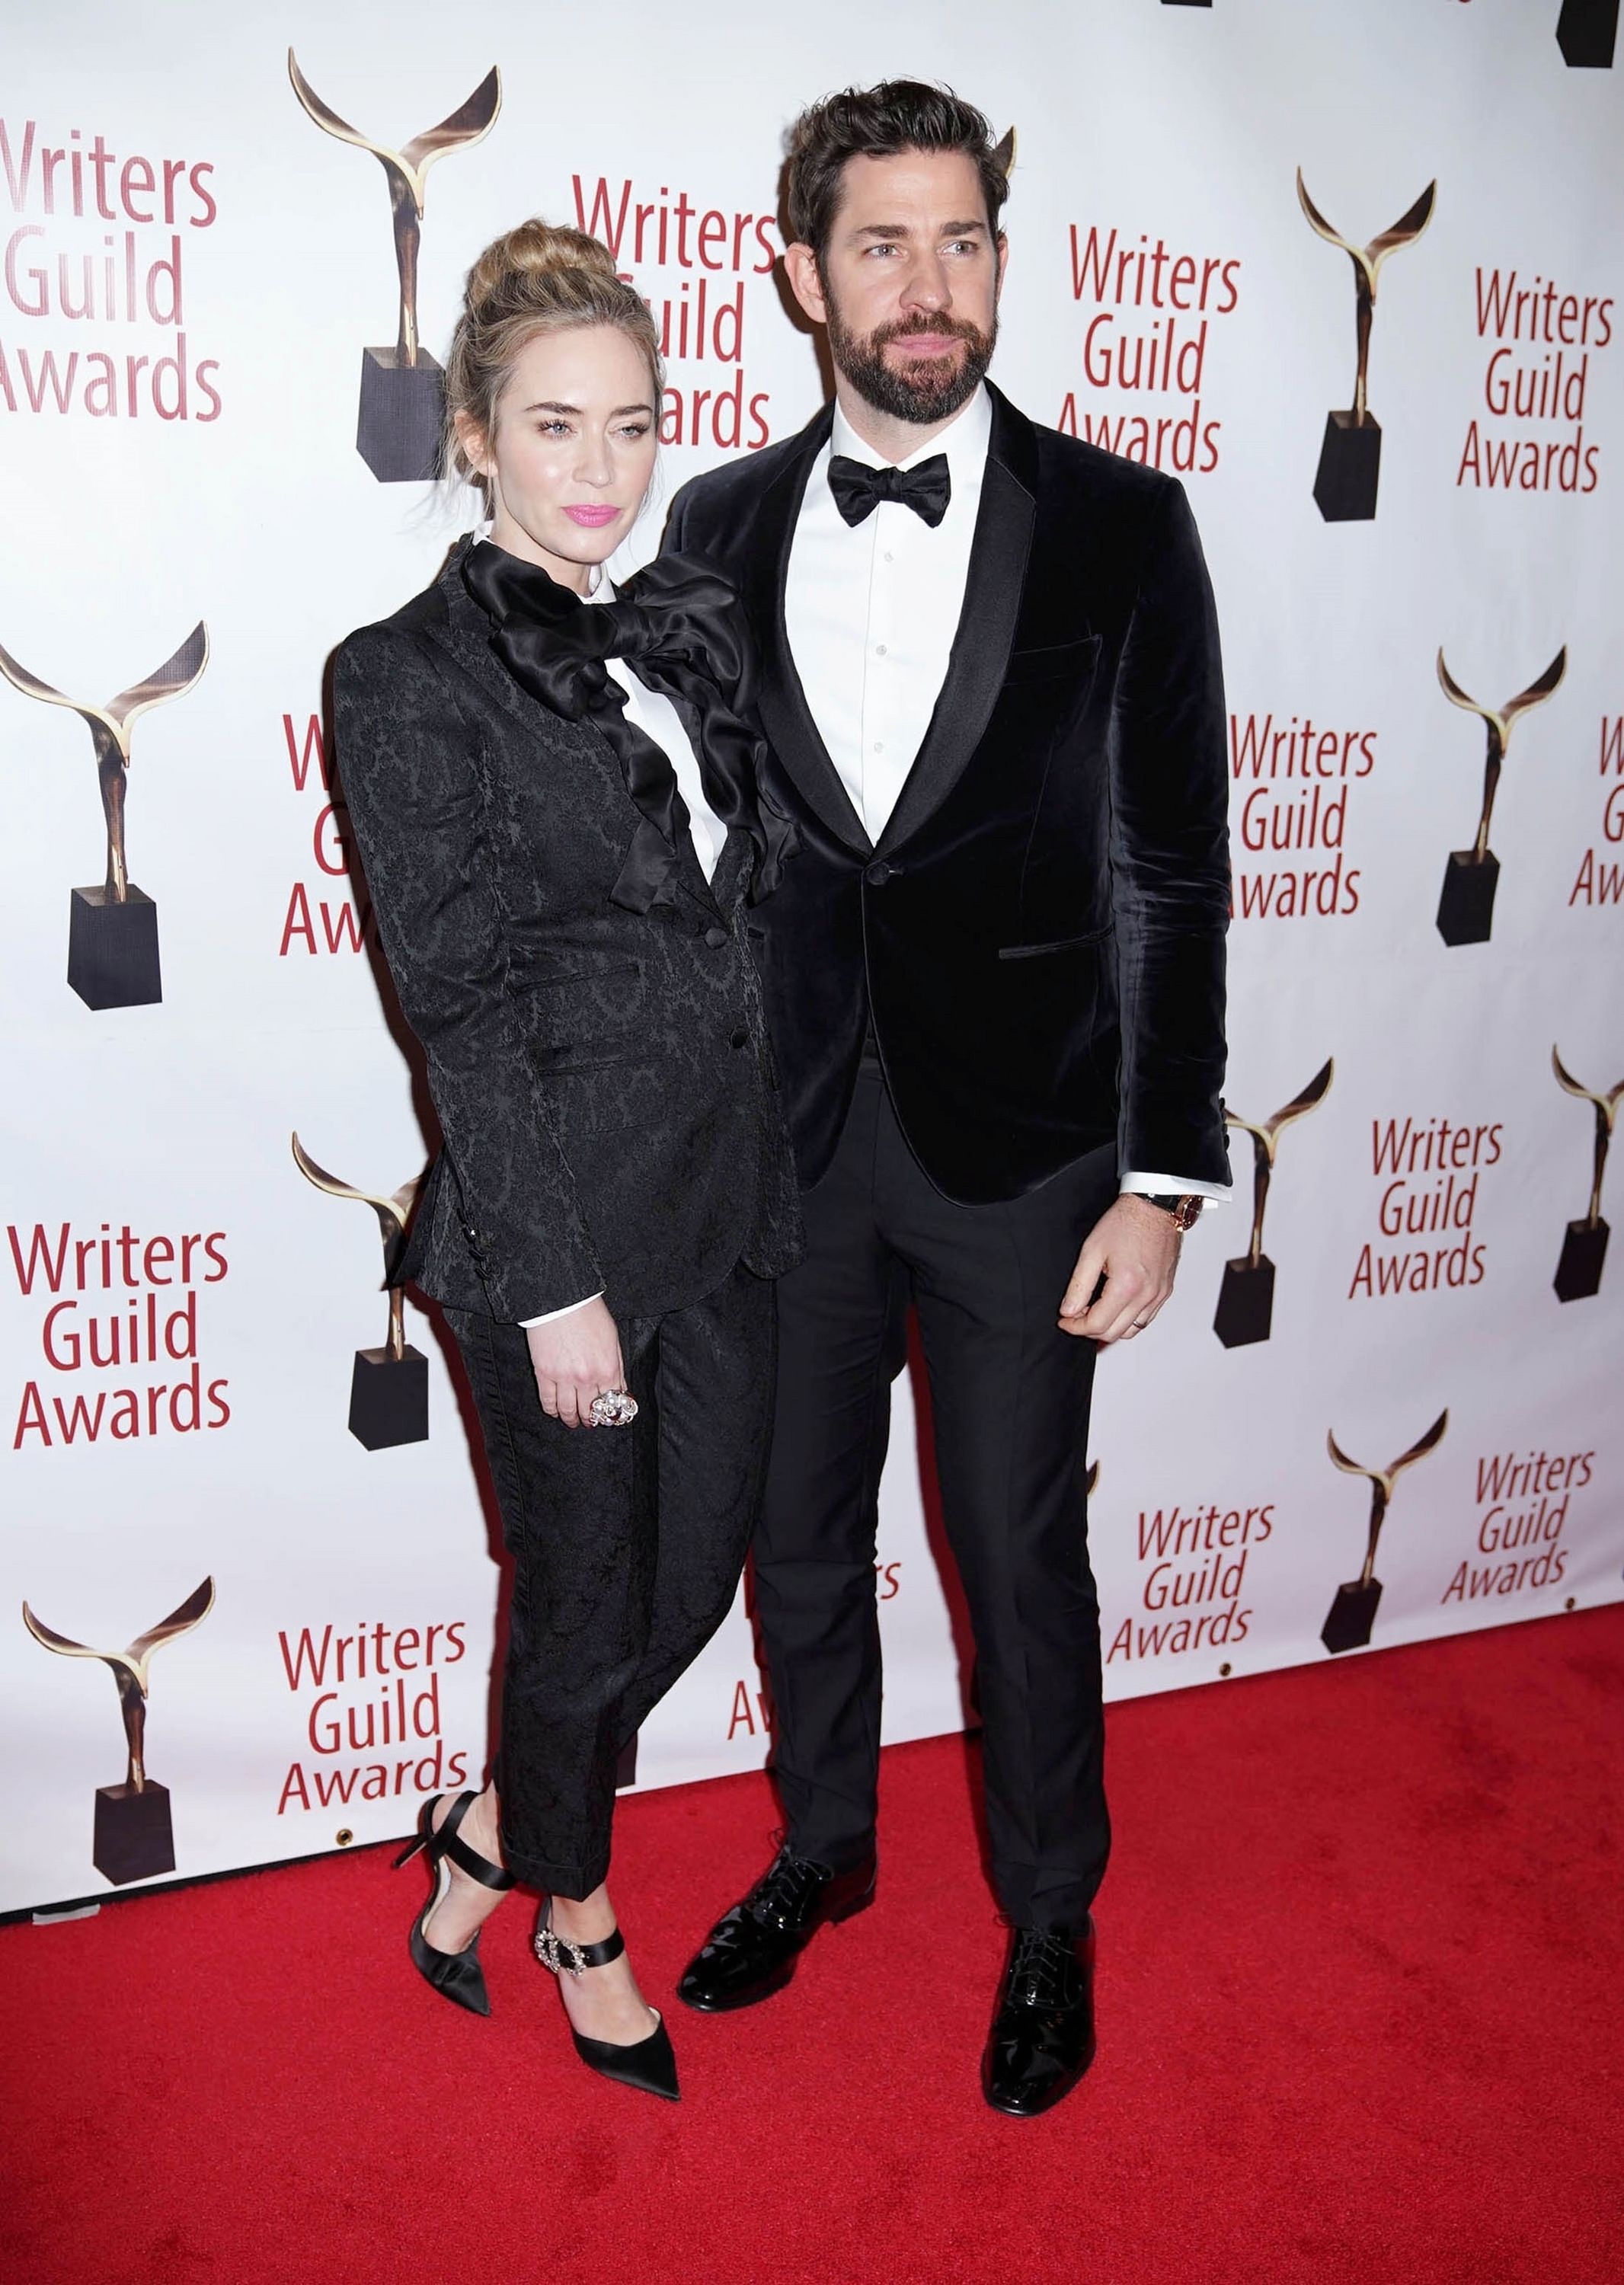 2019-02-17-71st-Annual-Writers-Guild-Awards-069.jpg